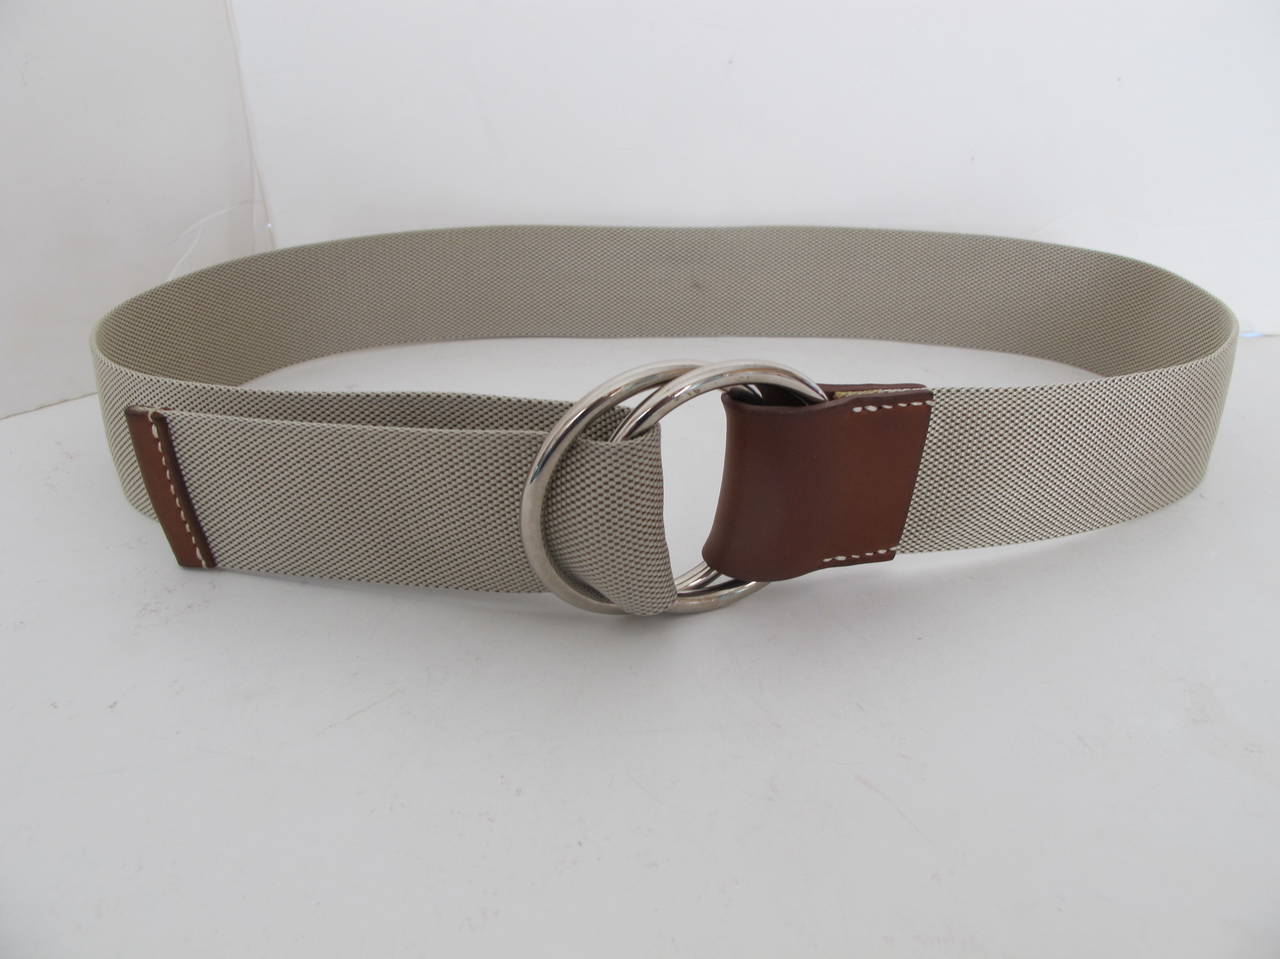 Hermes canvas type belt with silver ring buckle and brown leather. Belt measures 36 inches length (without ring buckle).  Belt measures 1.625 inches in height.